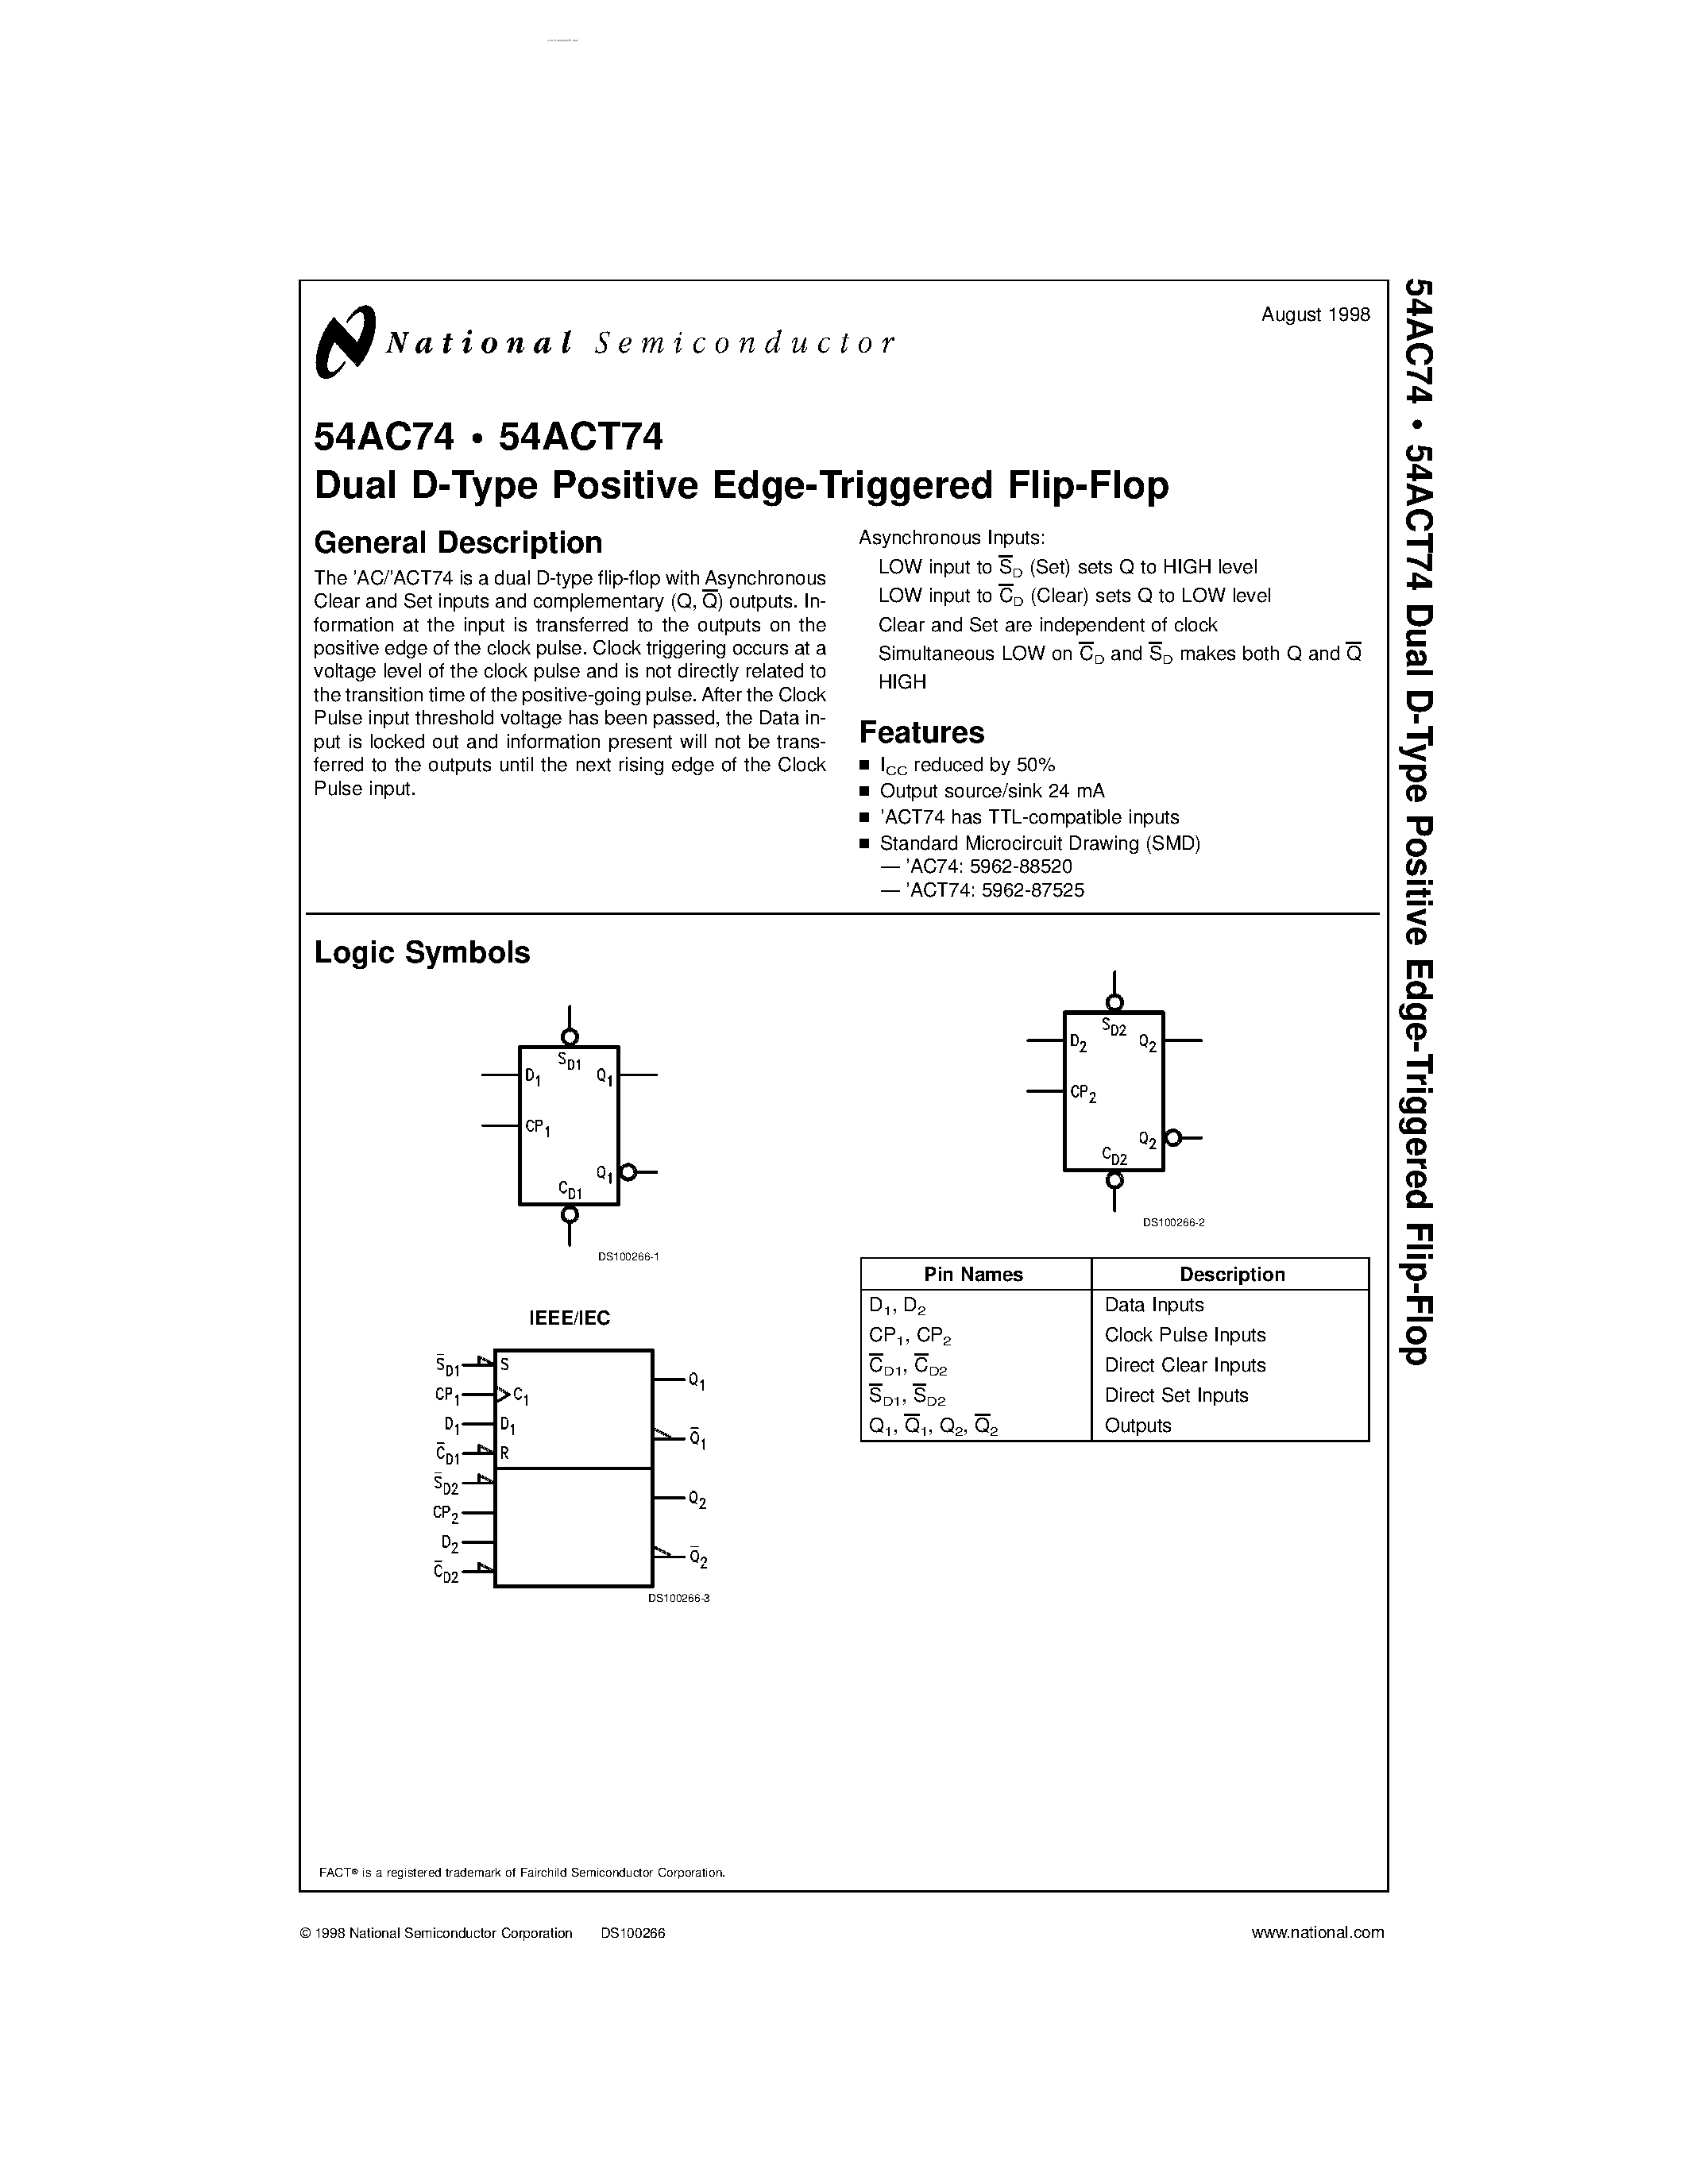 Datasheet 54AC74 - Dual D-Type Positive Edge-Triggered Flip-Flop page 1